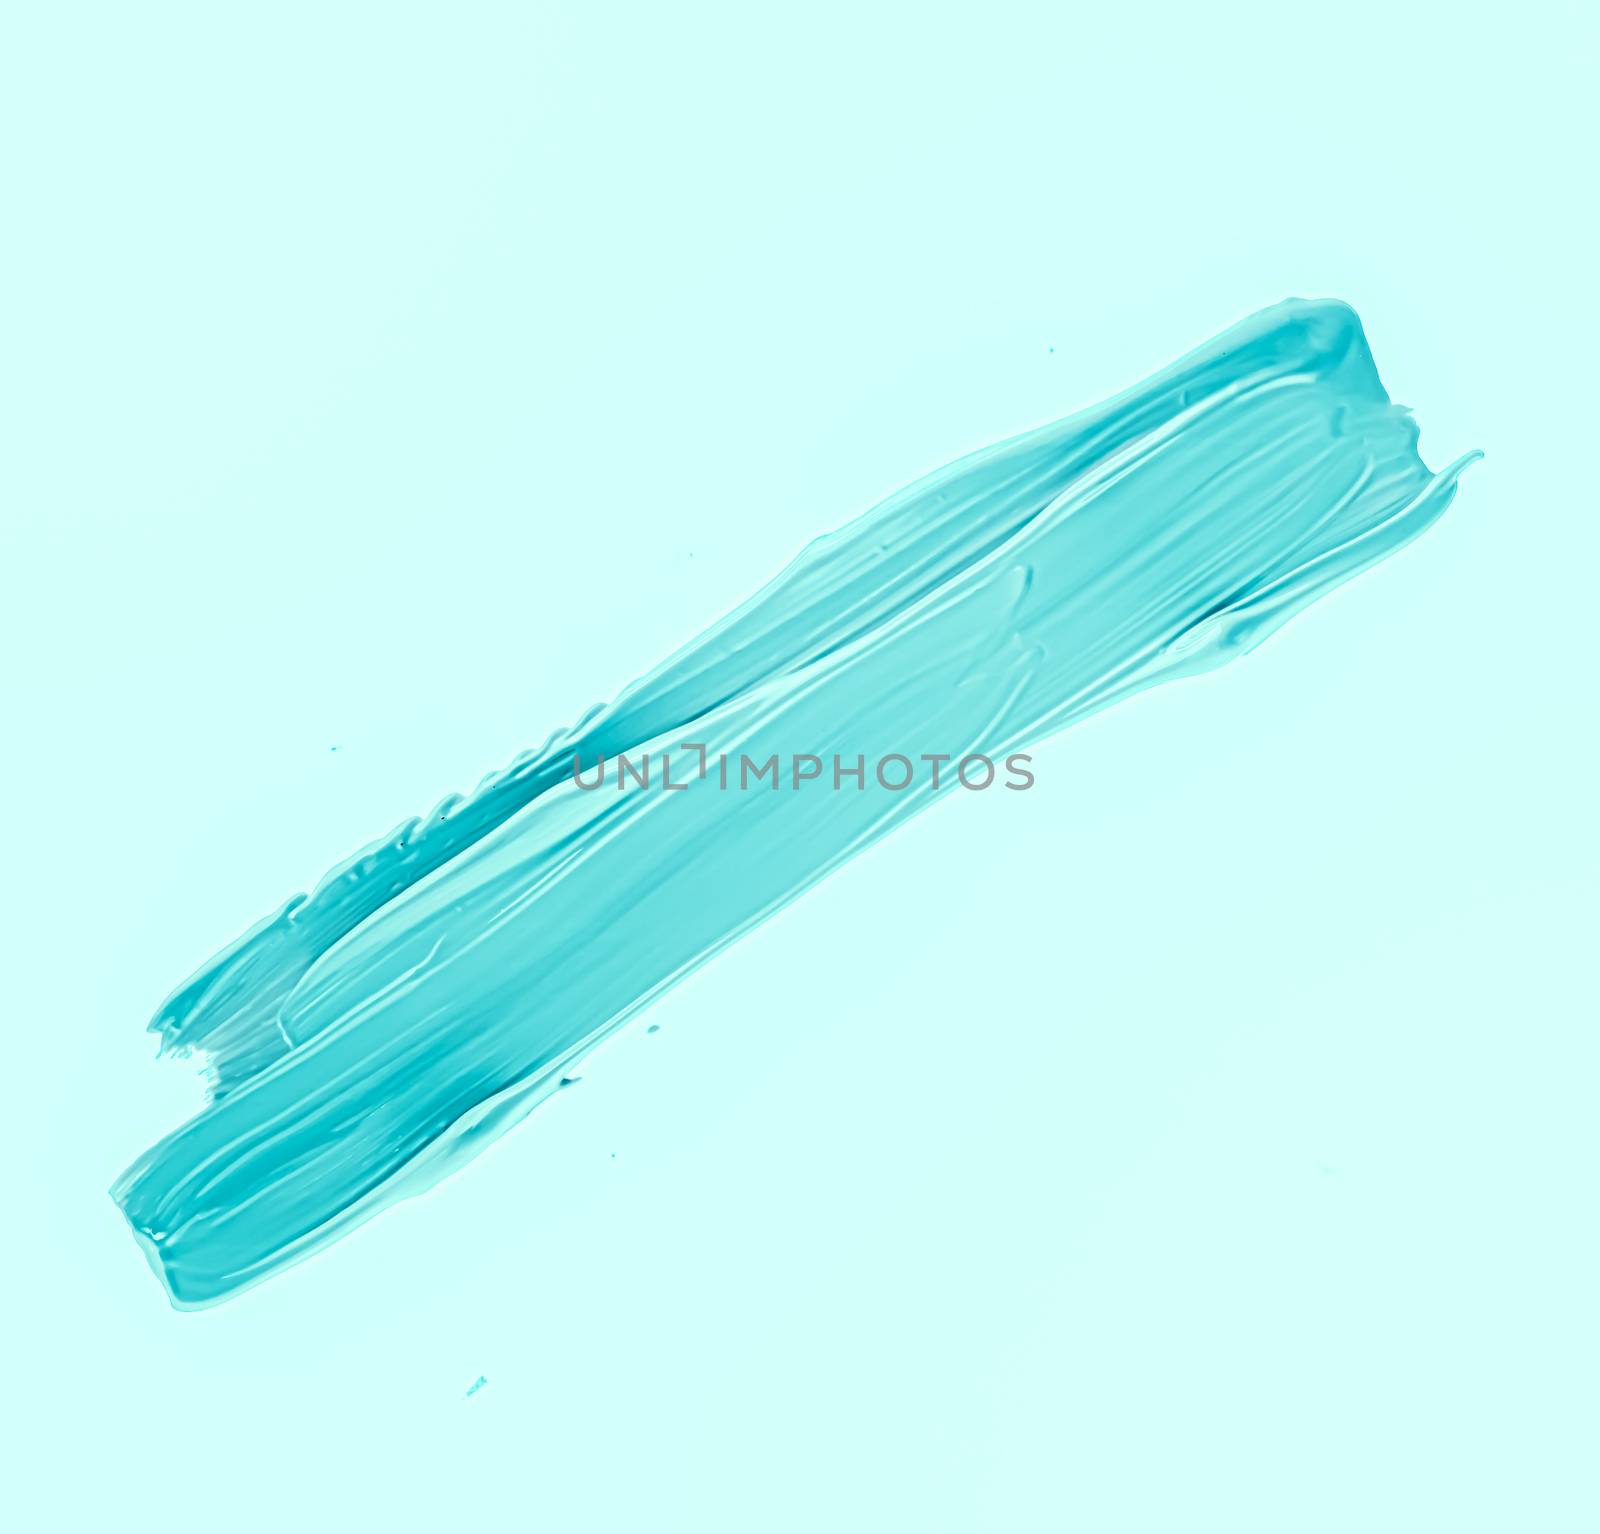 Mint brush stroke or makeup smudge closeup, beauty cosmetics and lipstick textures